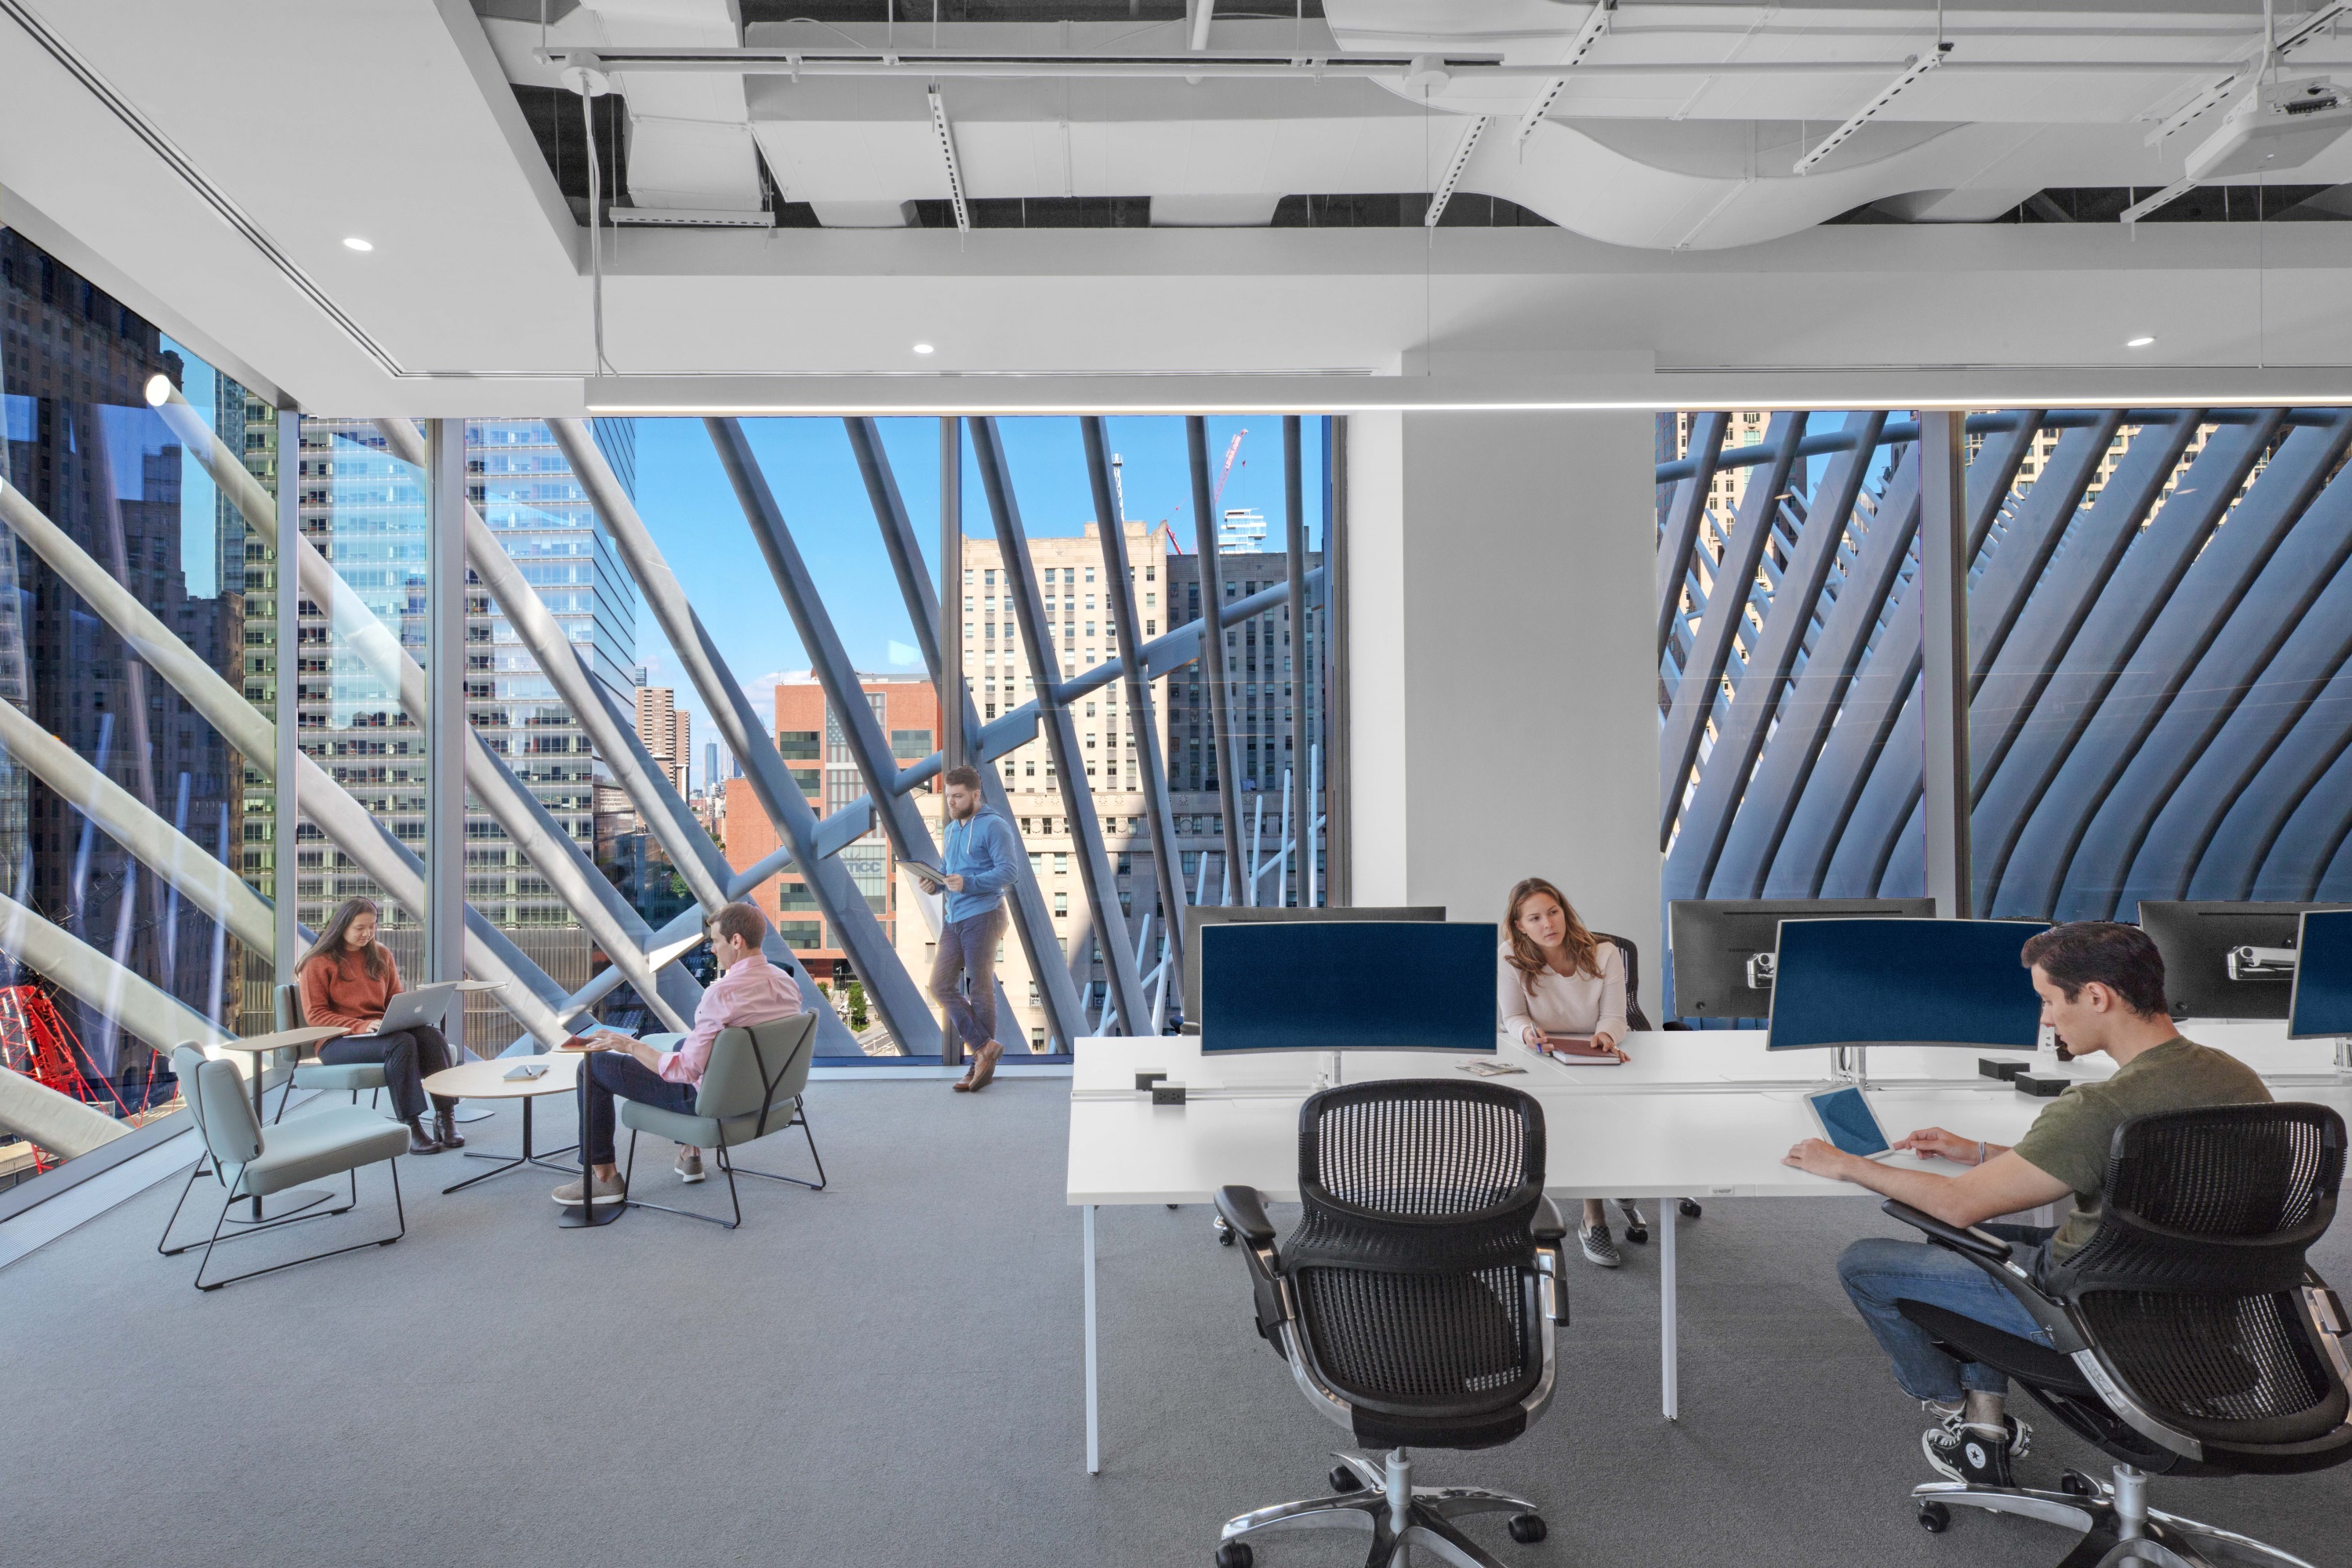 Figure 1: The WPP Campus at 3 World Trade Center houses 4,100 employees from eight different creative media agencies with a variety of workspaces and acoustic accommodations to meet worker needs. Credit Eric Laignel